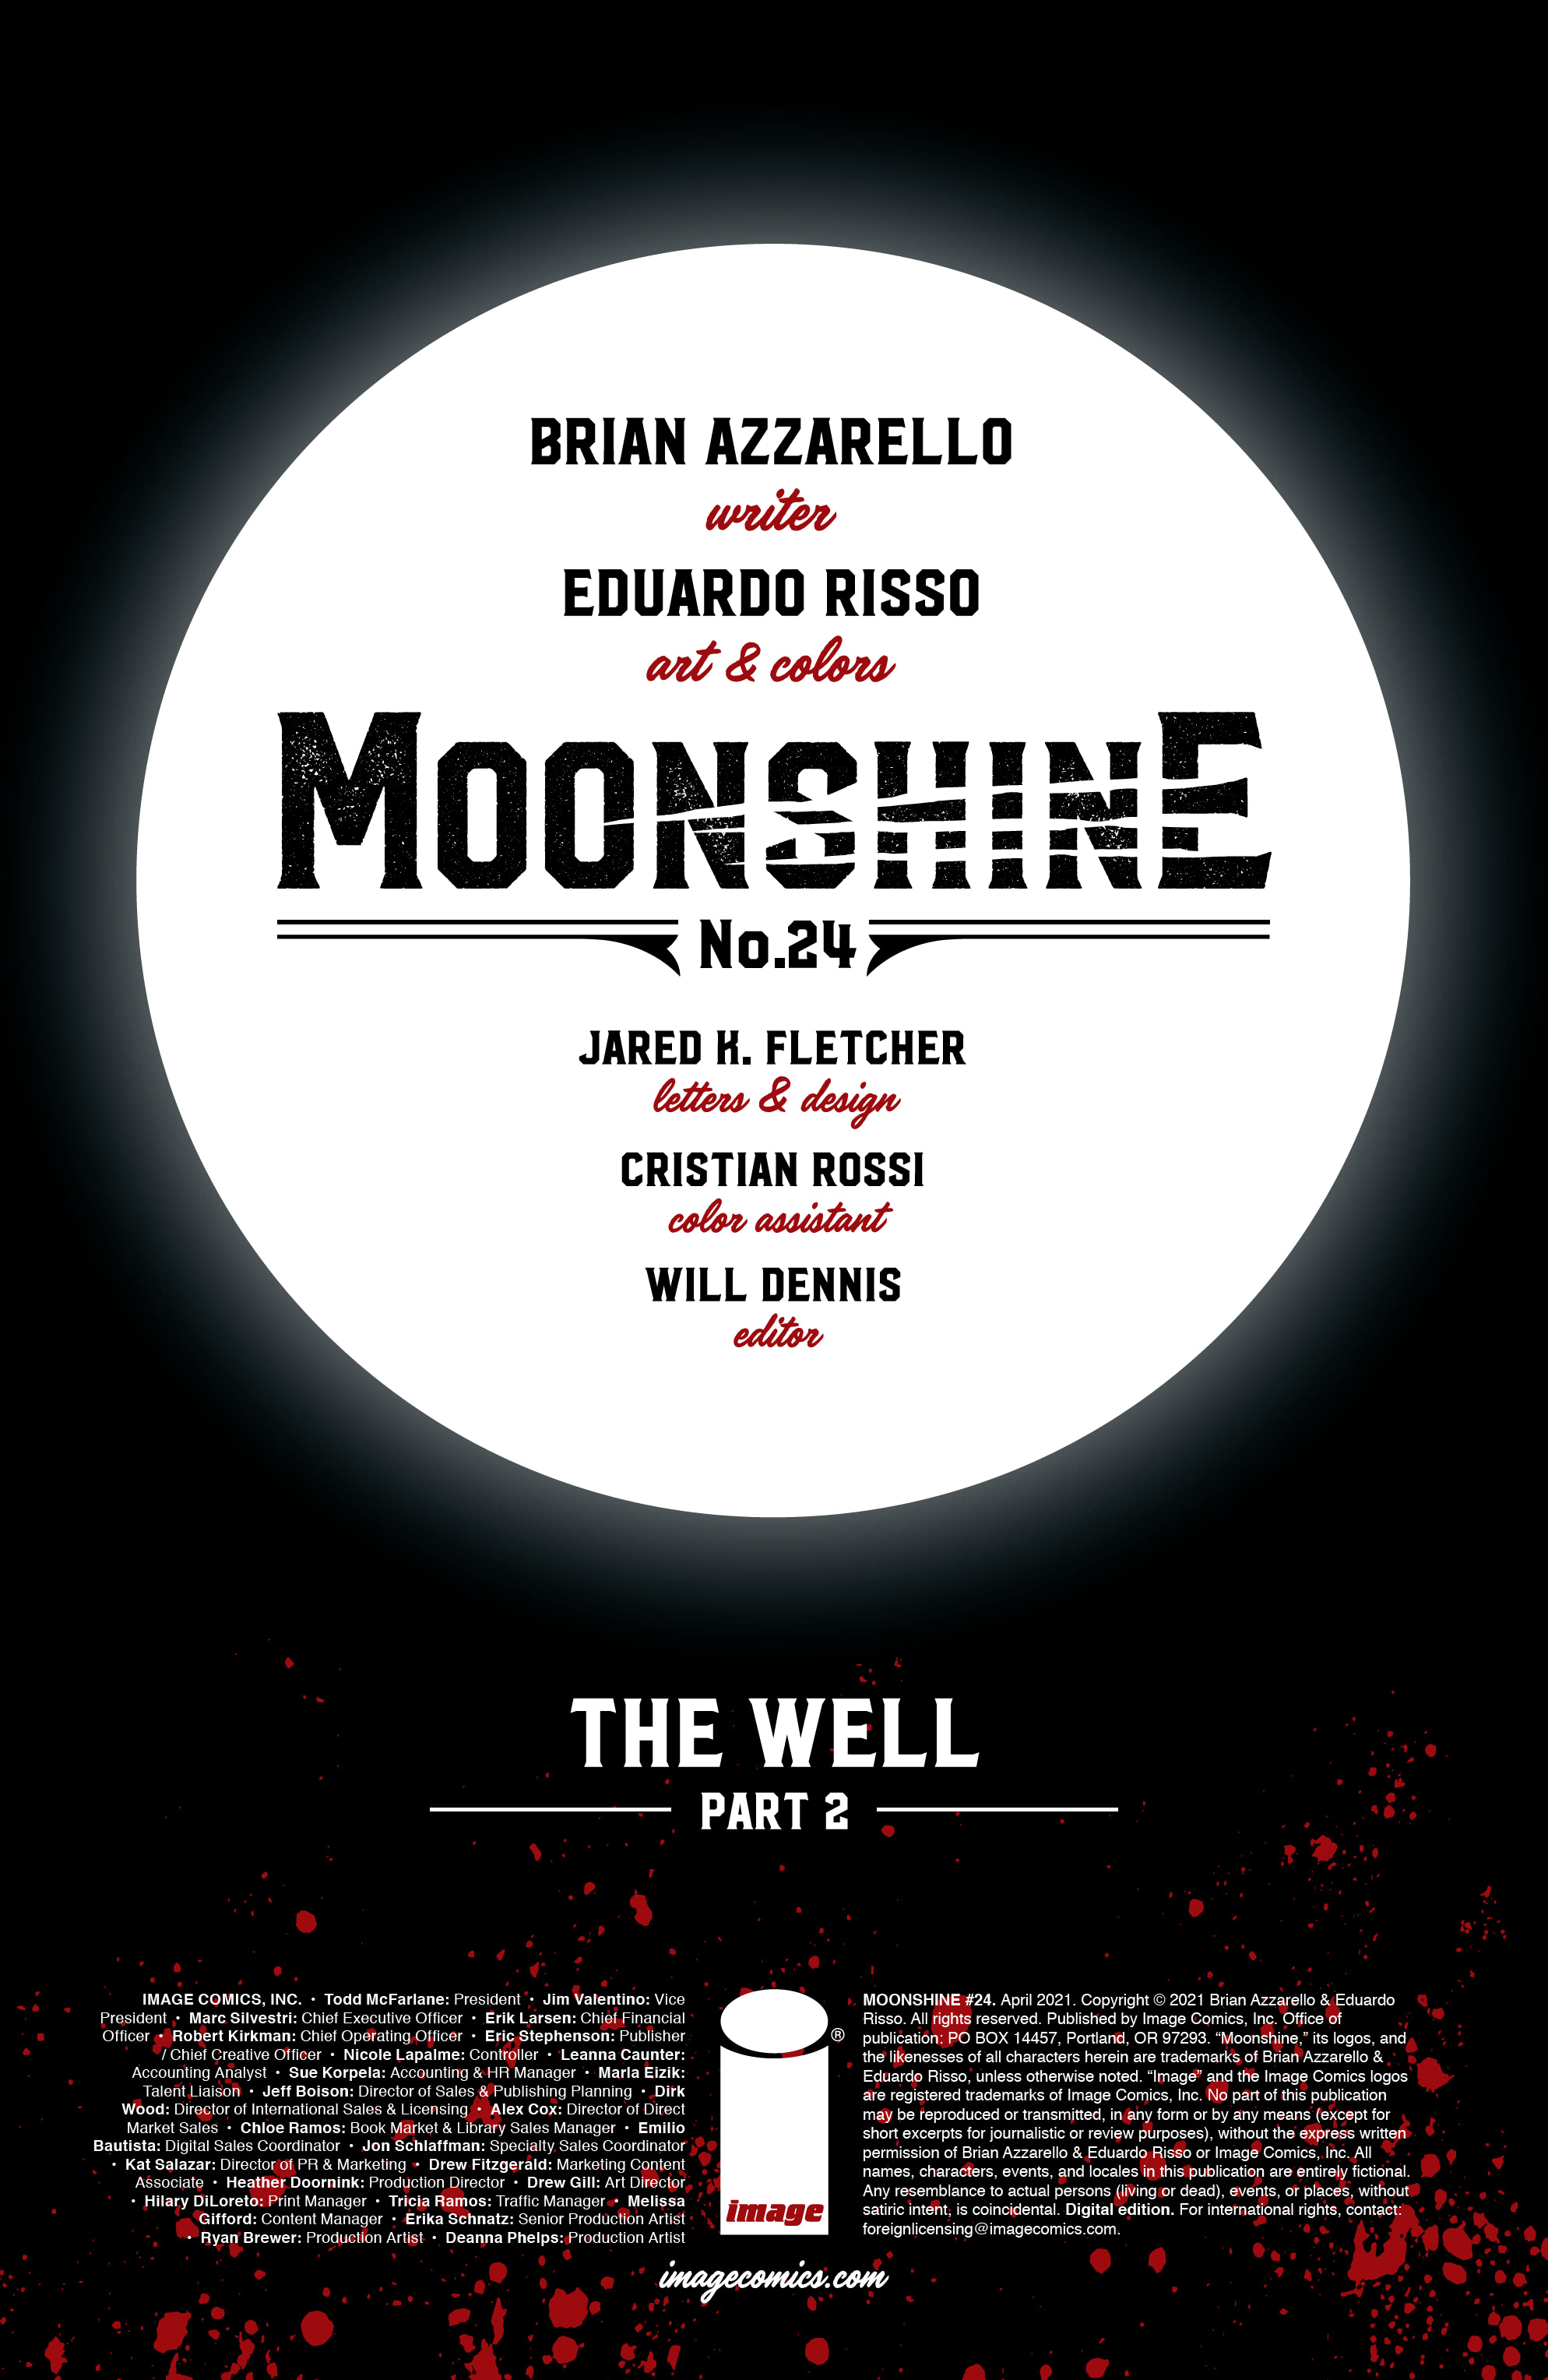 Read online Moonshine comic -  Issue #24 - 2